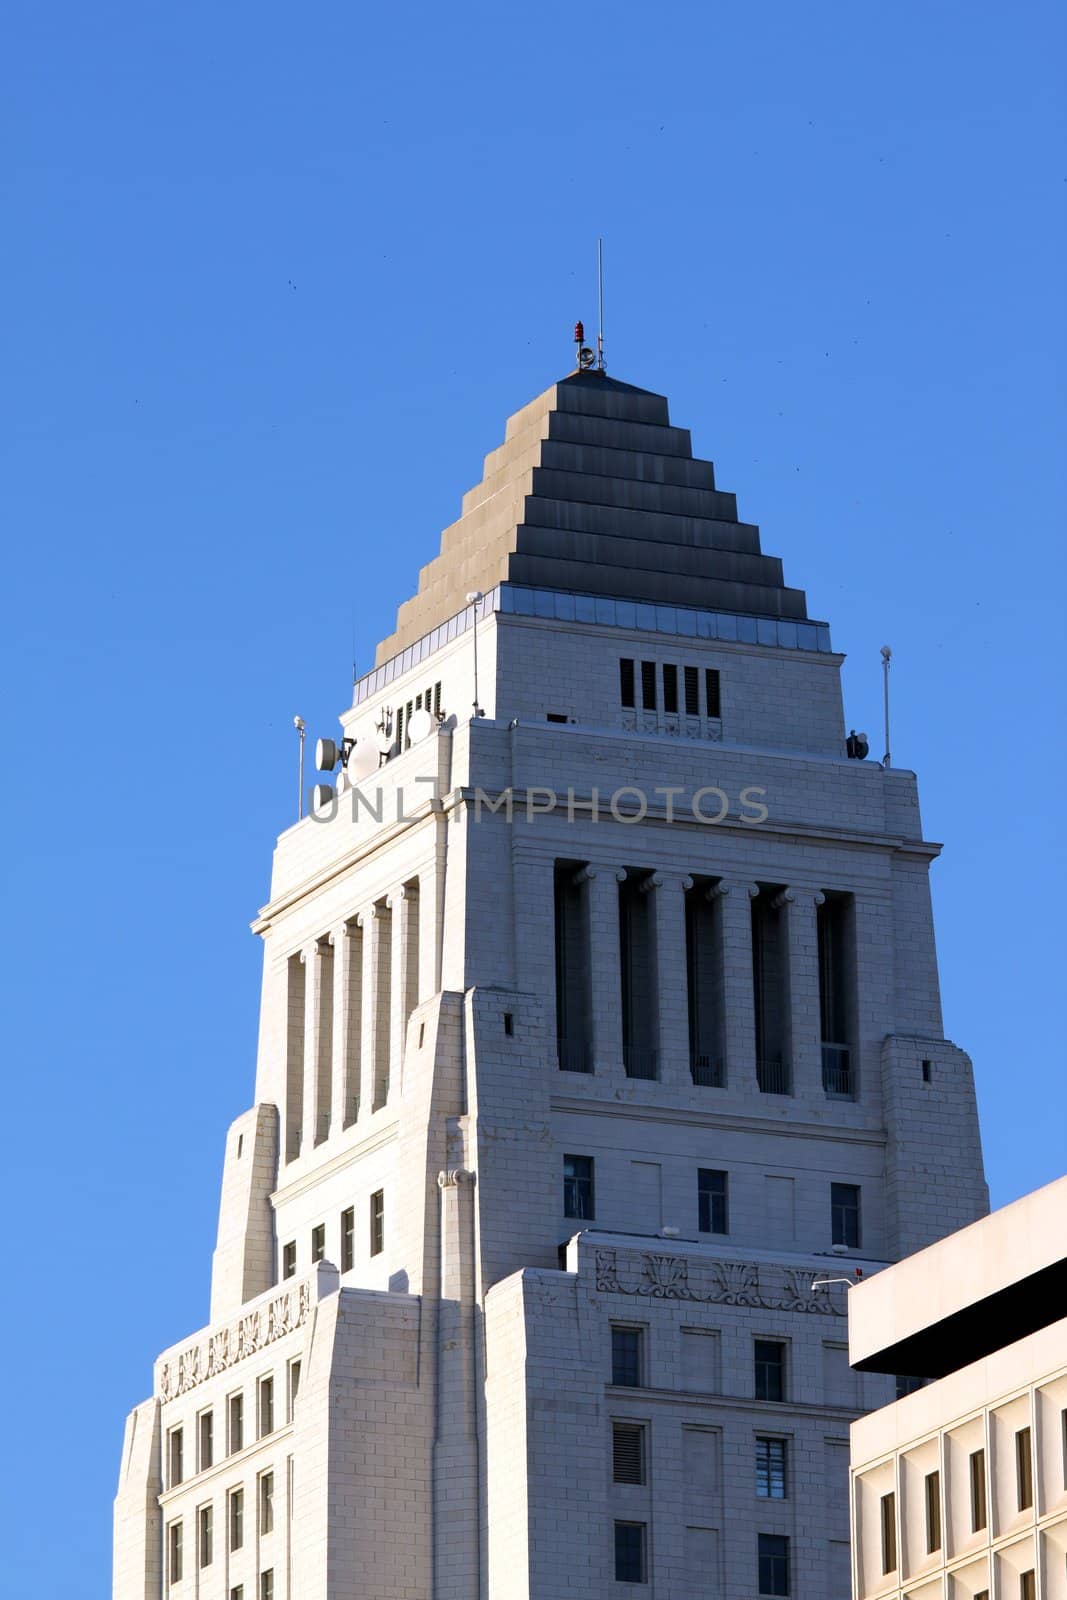 Top part and rooftop of the city hall in downtown Los Angeles